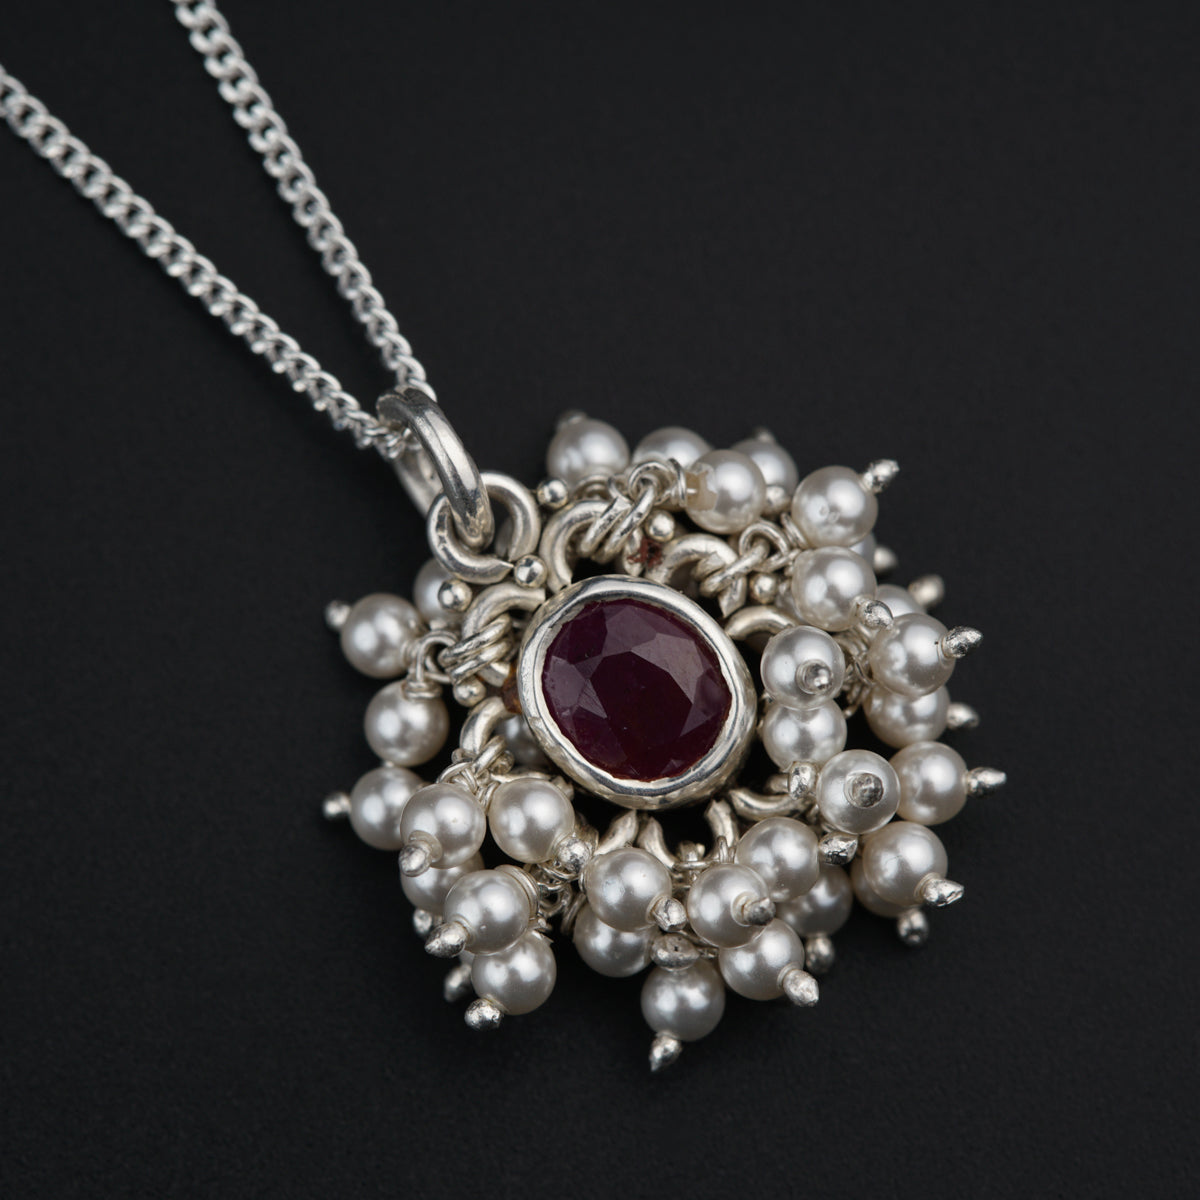 a necklace with a red stone surrounded by pearls